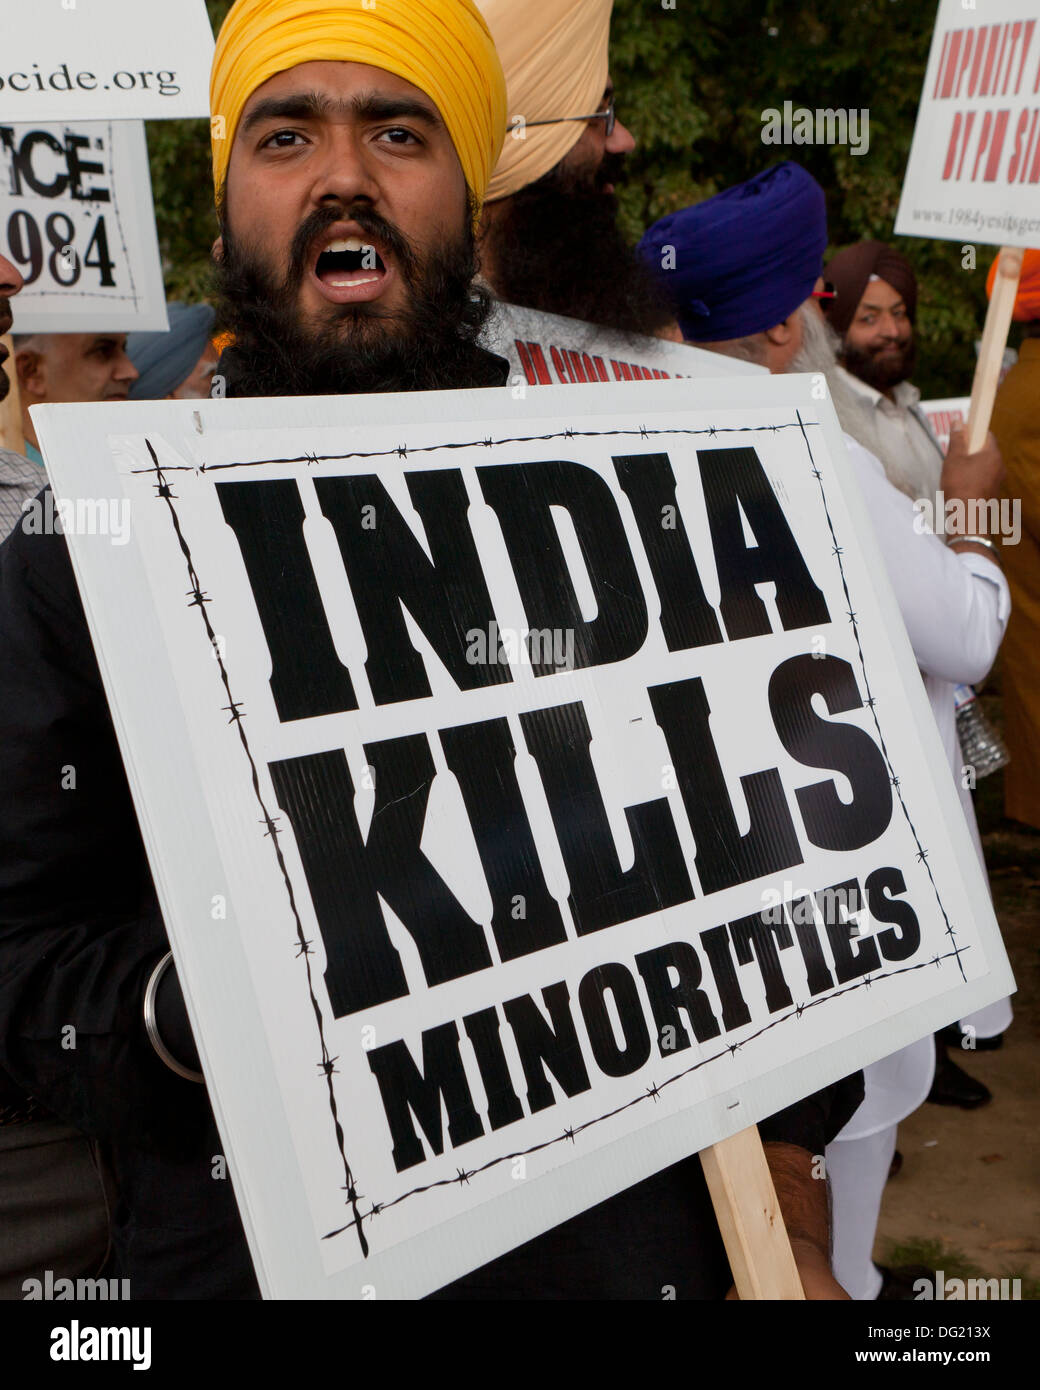 sikhs-for-justice-protest-against-genocide-in-india-washington-dc-DG213X.jpg